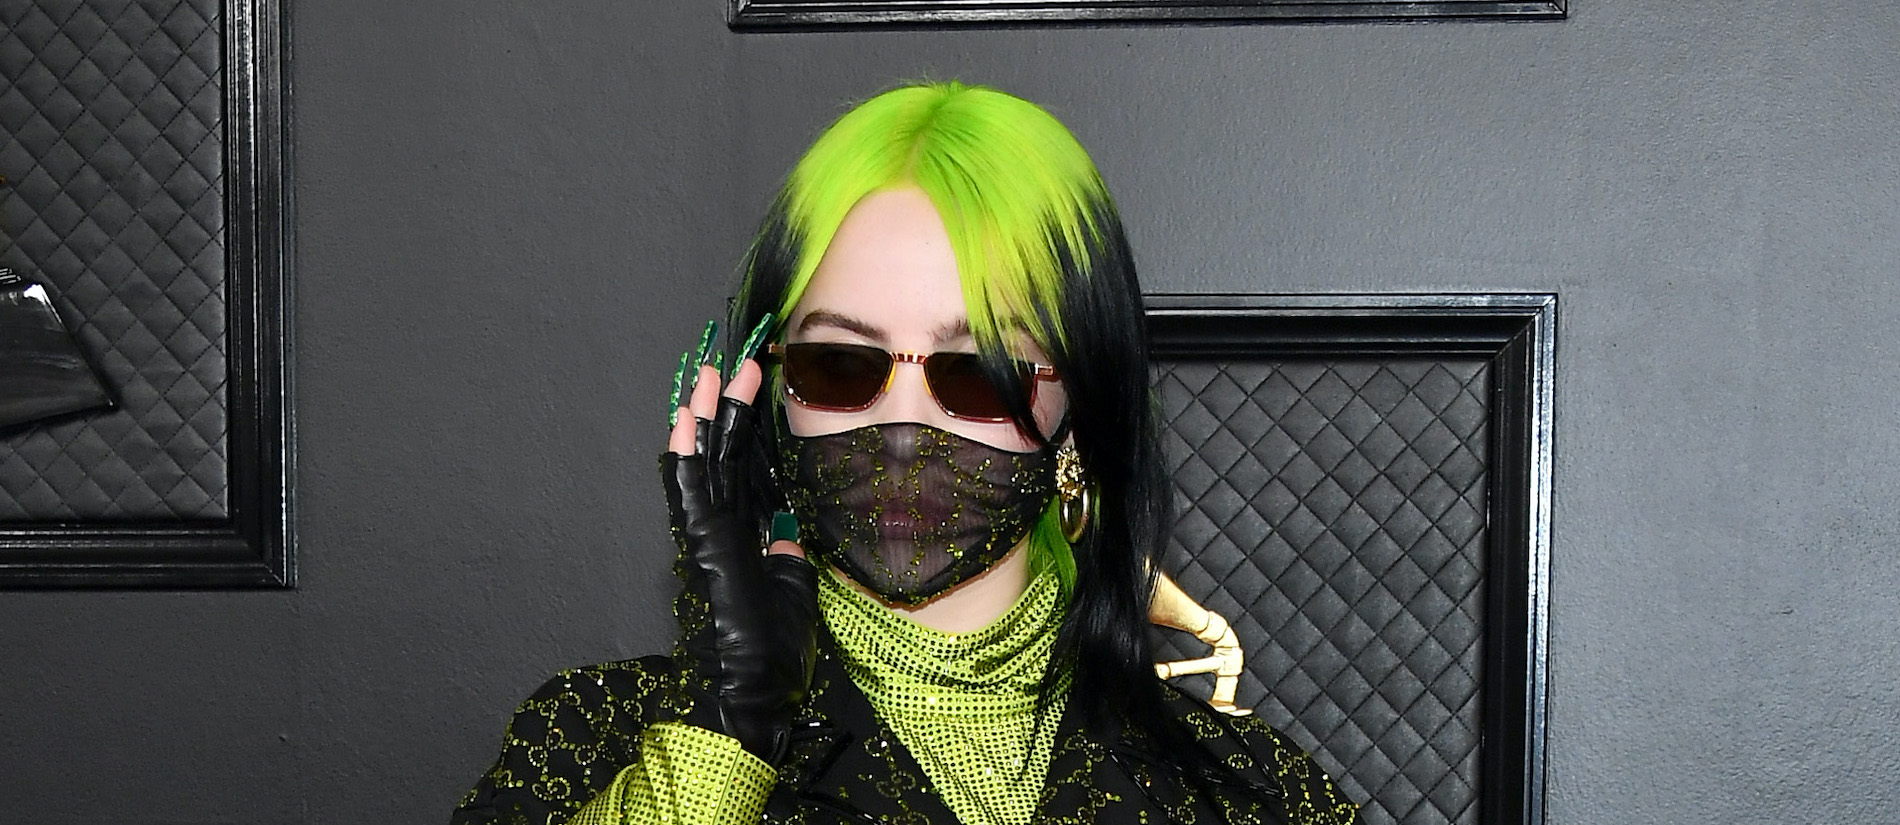 Billie Eilish, The Weeknd, And More Are Selling Face Masks For Charity